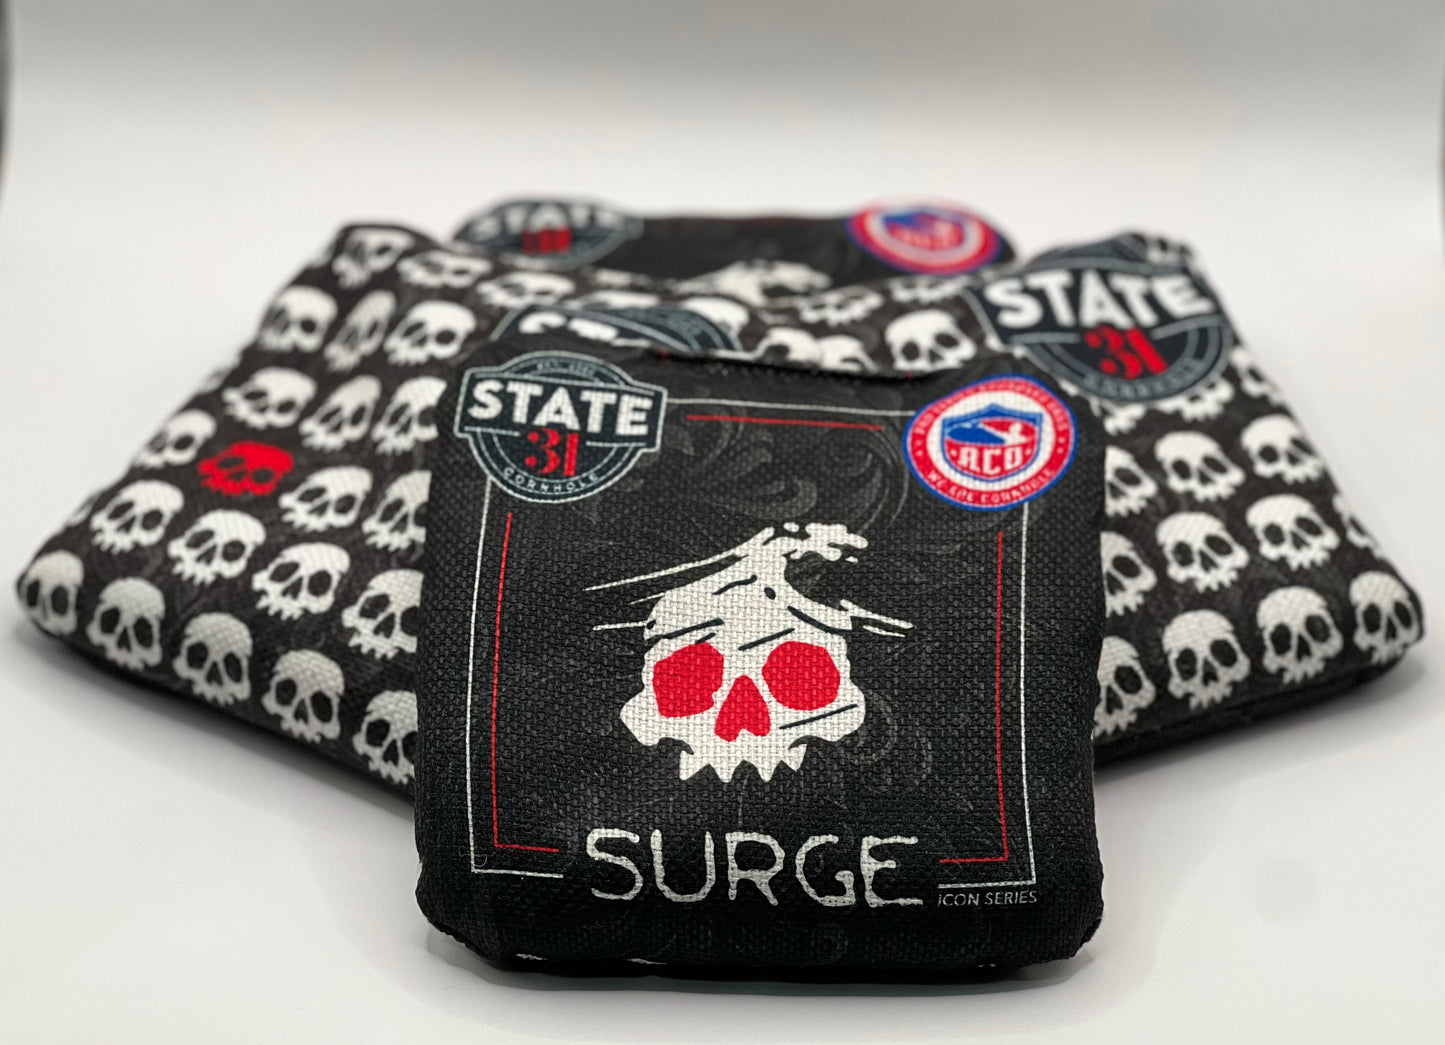 Surge - ACO Stamped - Icon Series